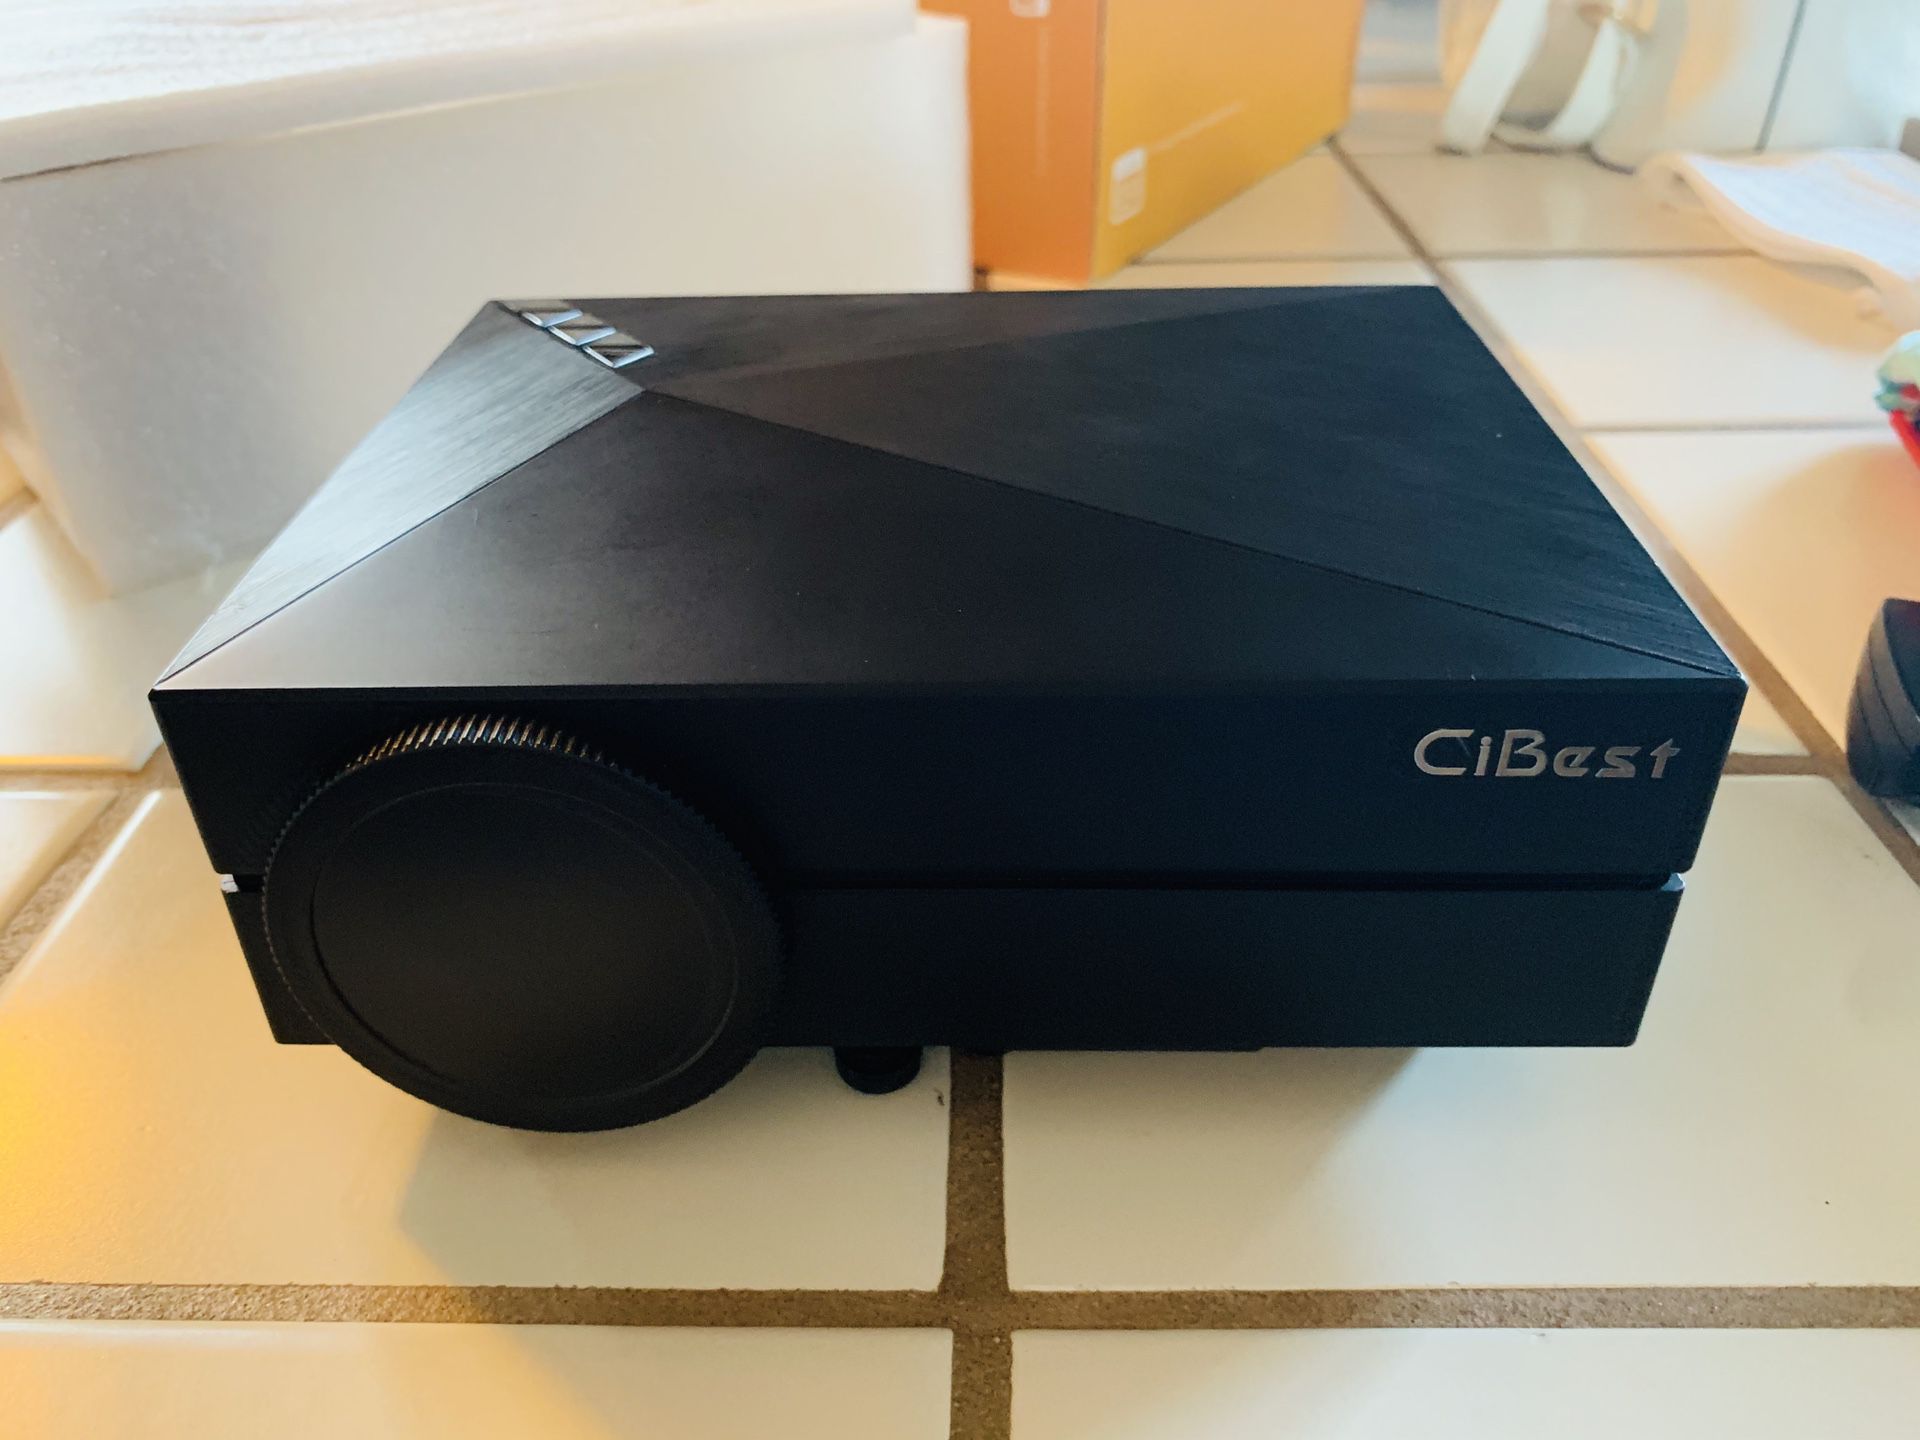 CIBest LED HDMI Projector